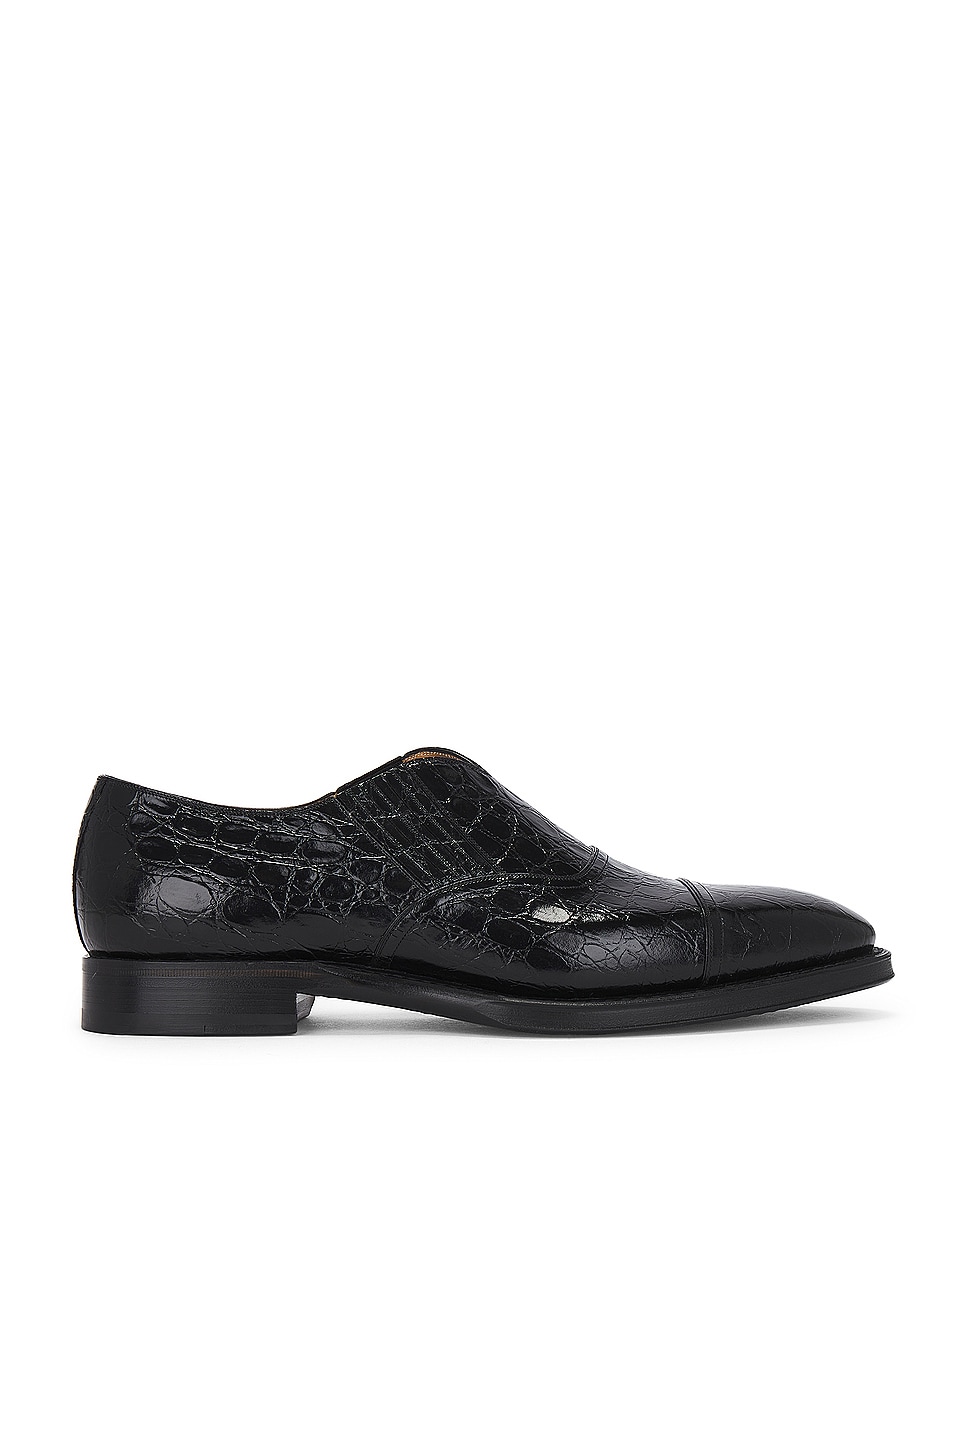 Image 1 of Bally Savery Crocodile Loafer in Black